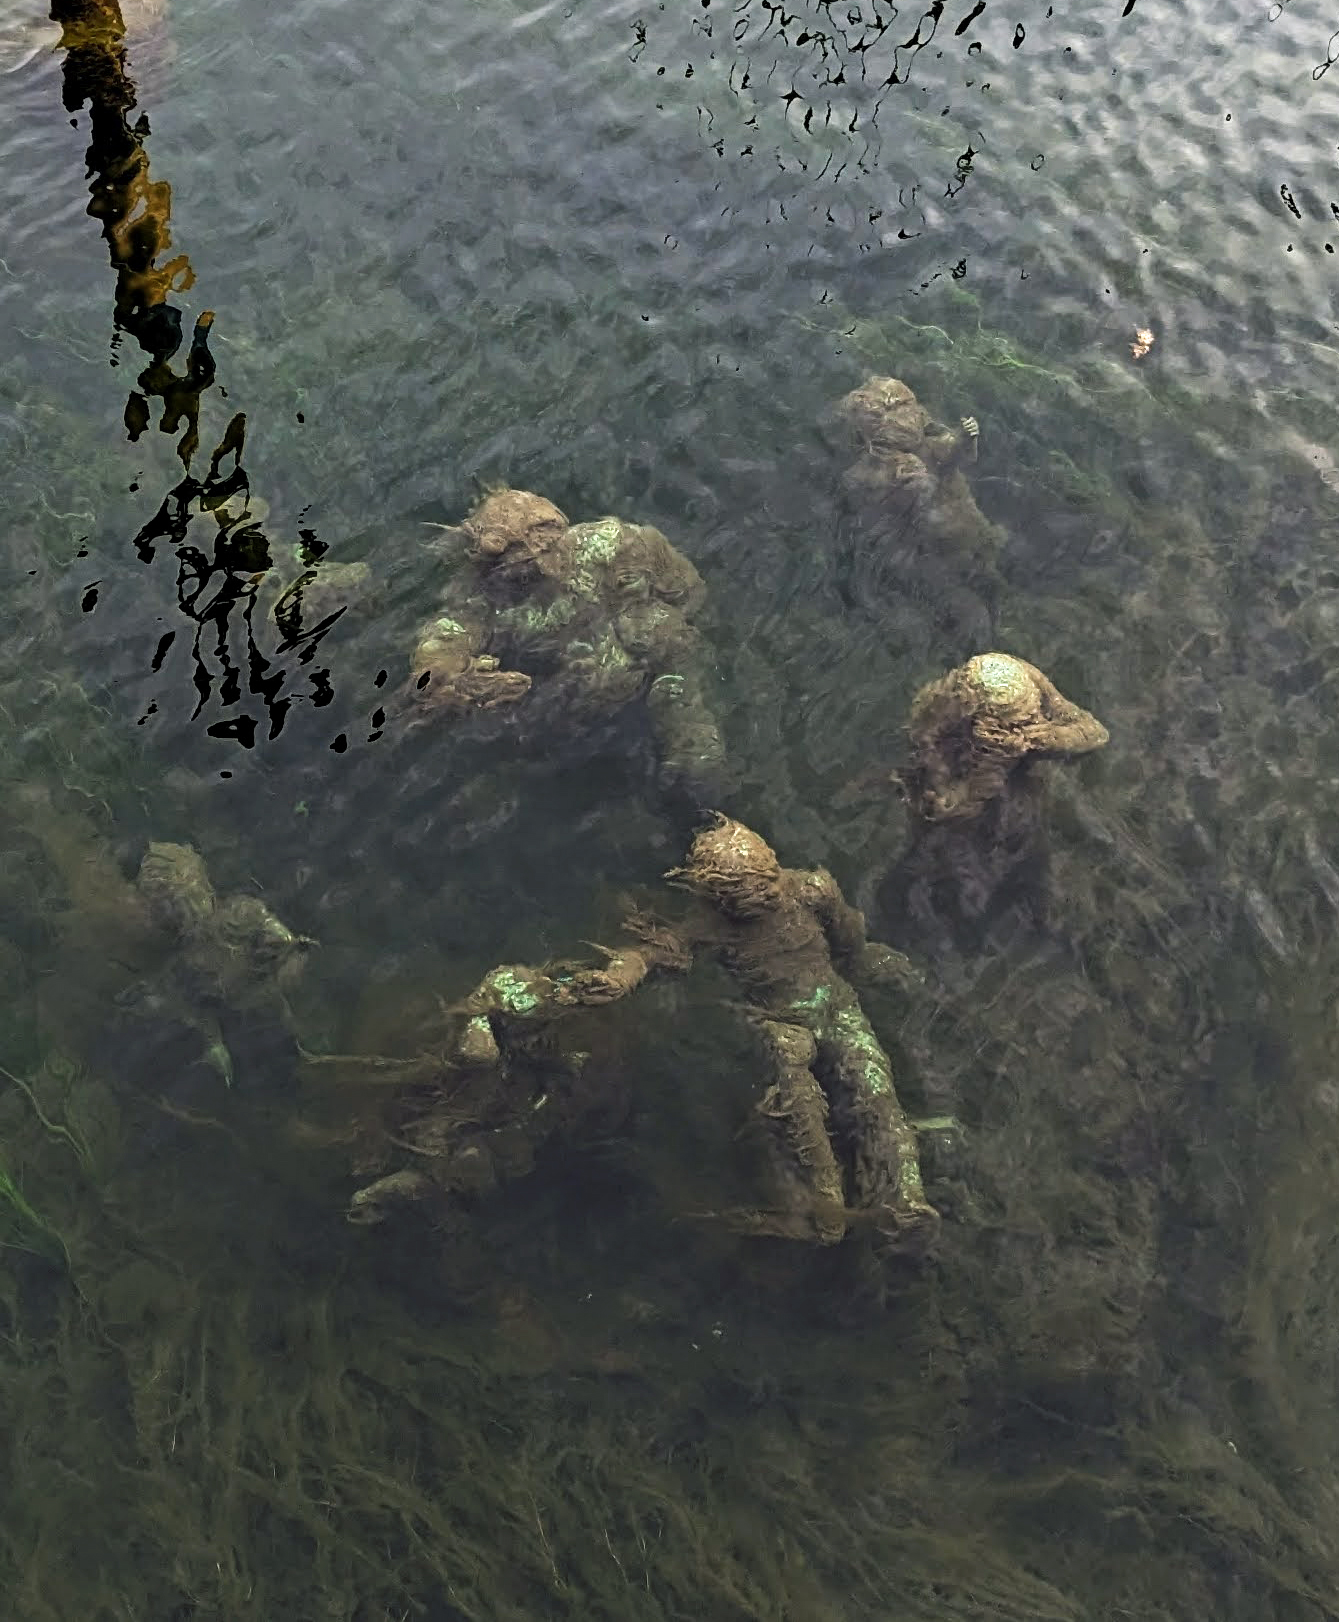  five human figures made of stone, underwater. They are green and blue, with algae growing around them an on them.